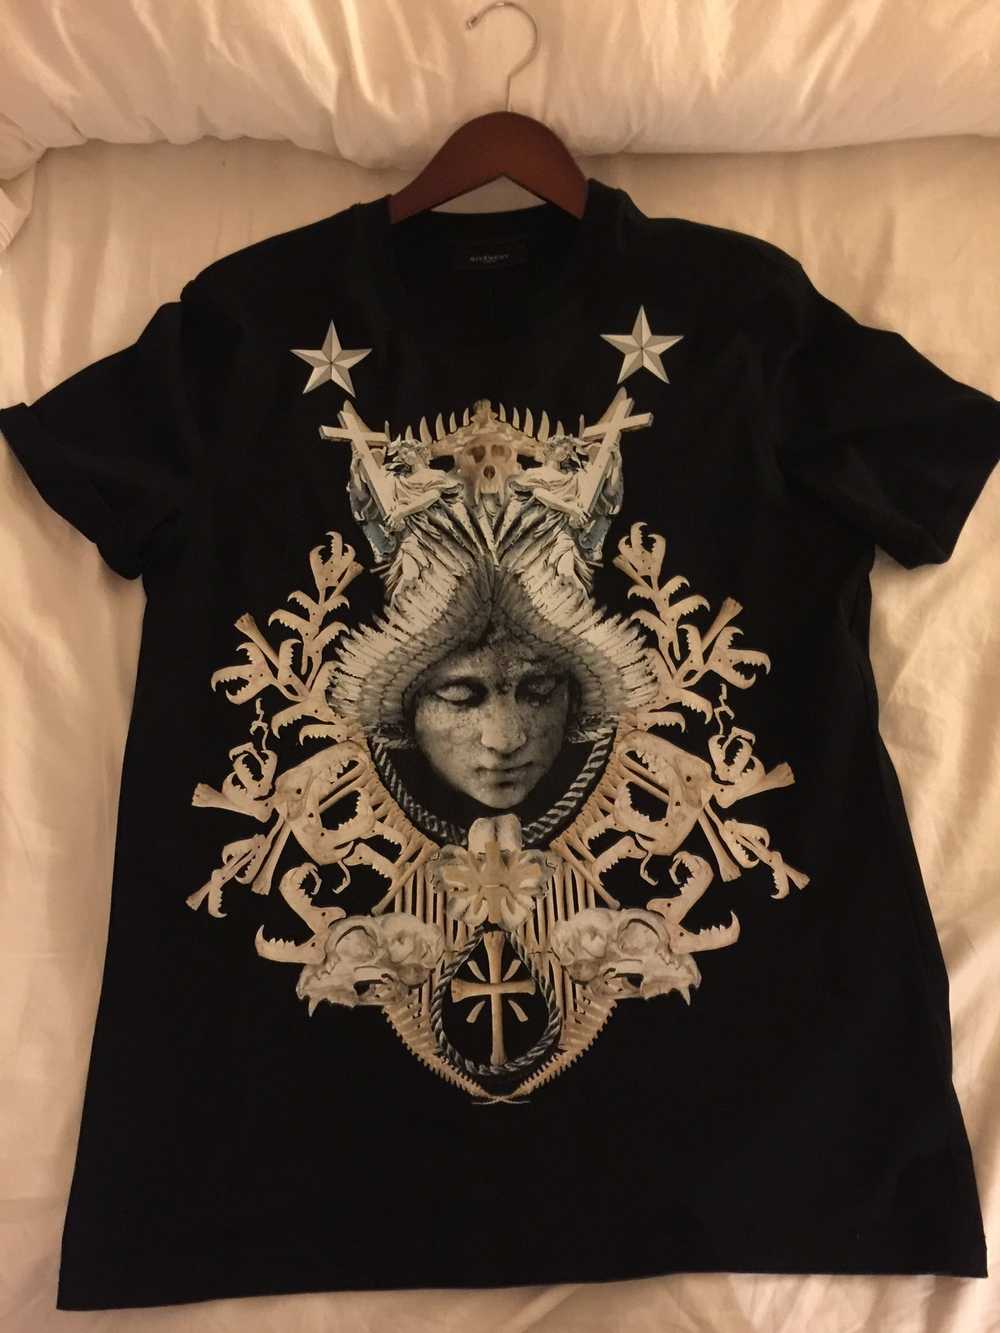 Givenchy sculpture face tee - image 1